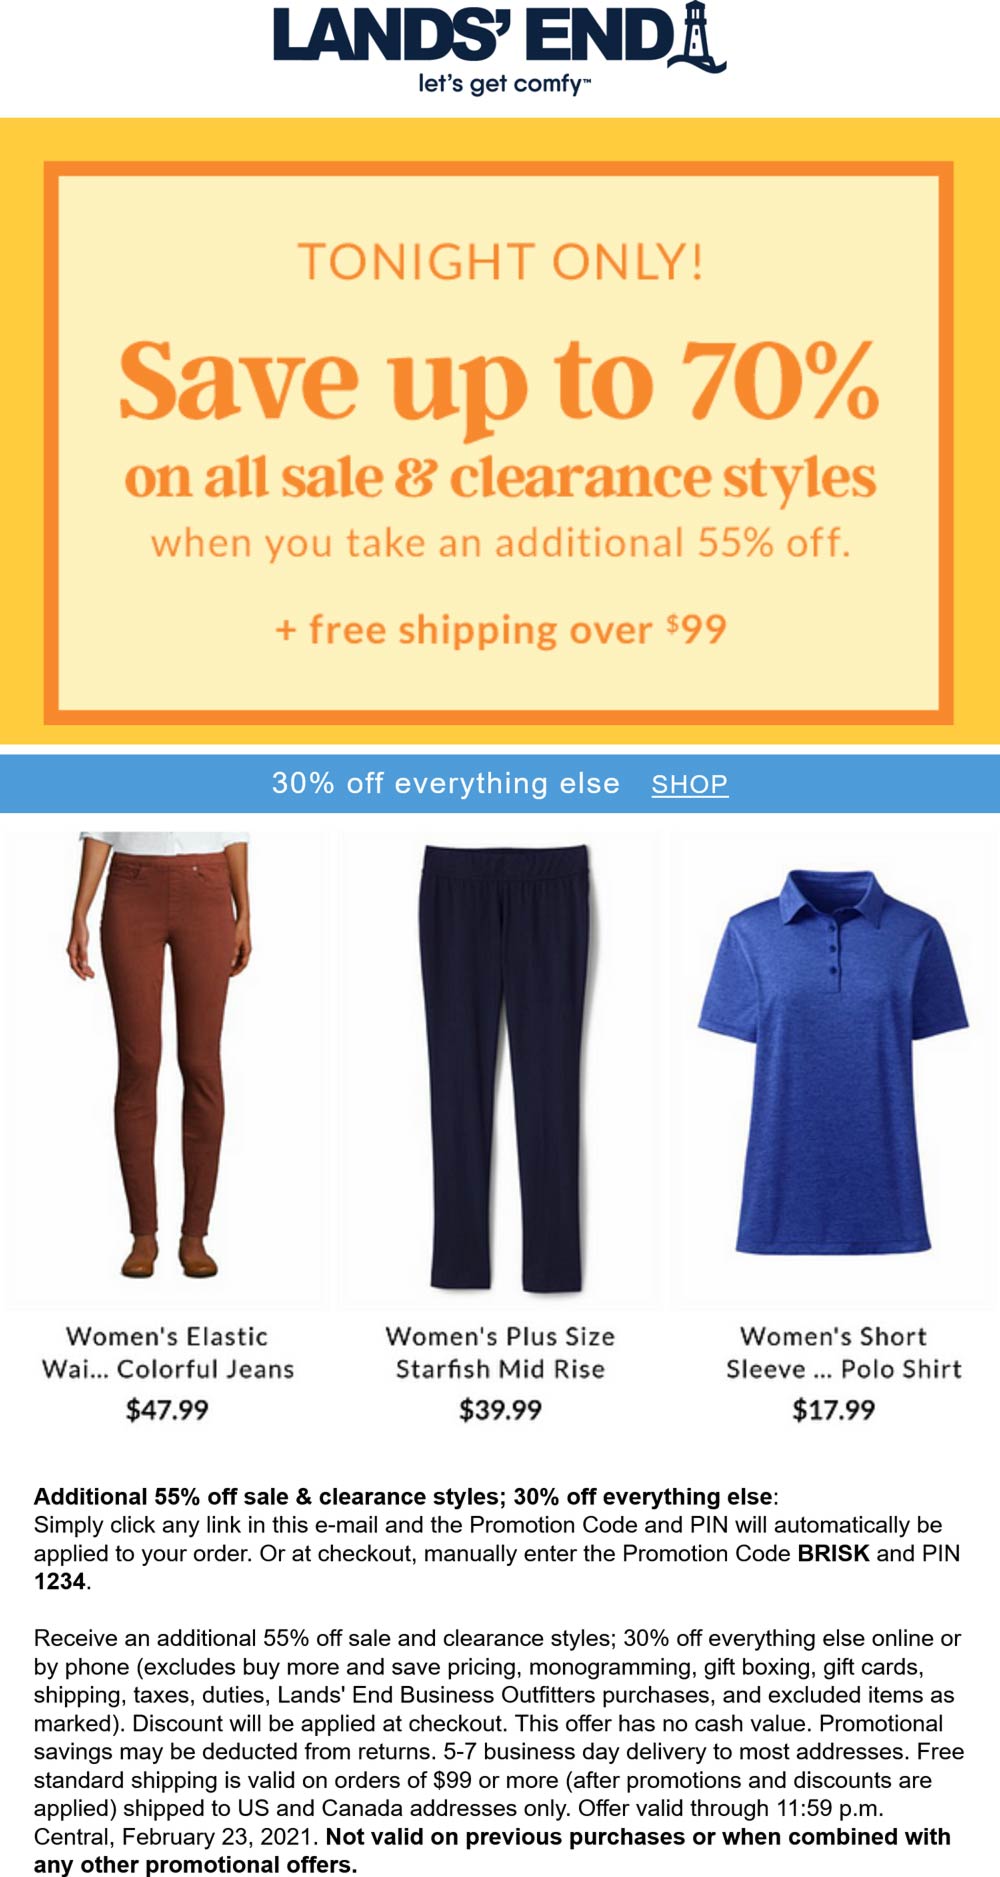 Lands End stores Coupon  Extra 30-55% off everything today at Lands End via promo code BRISK and pin 1234 #landsend 